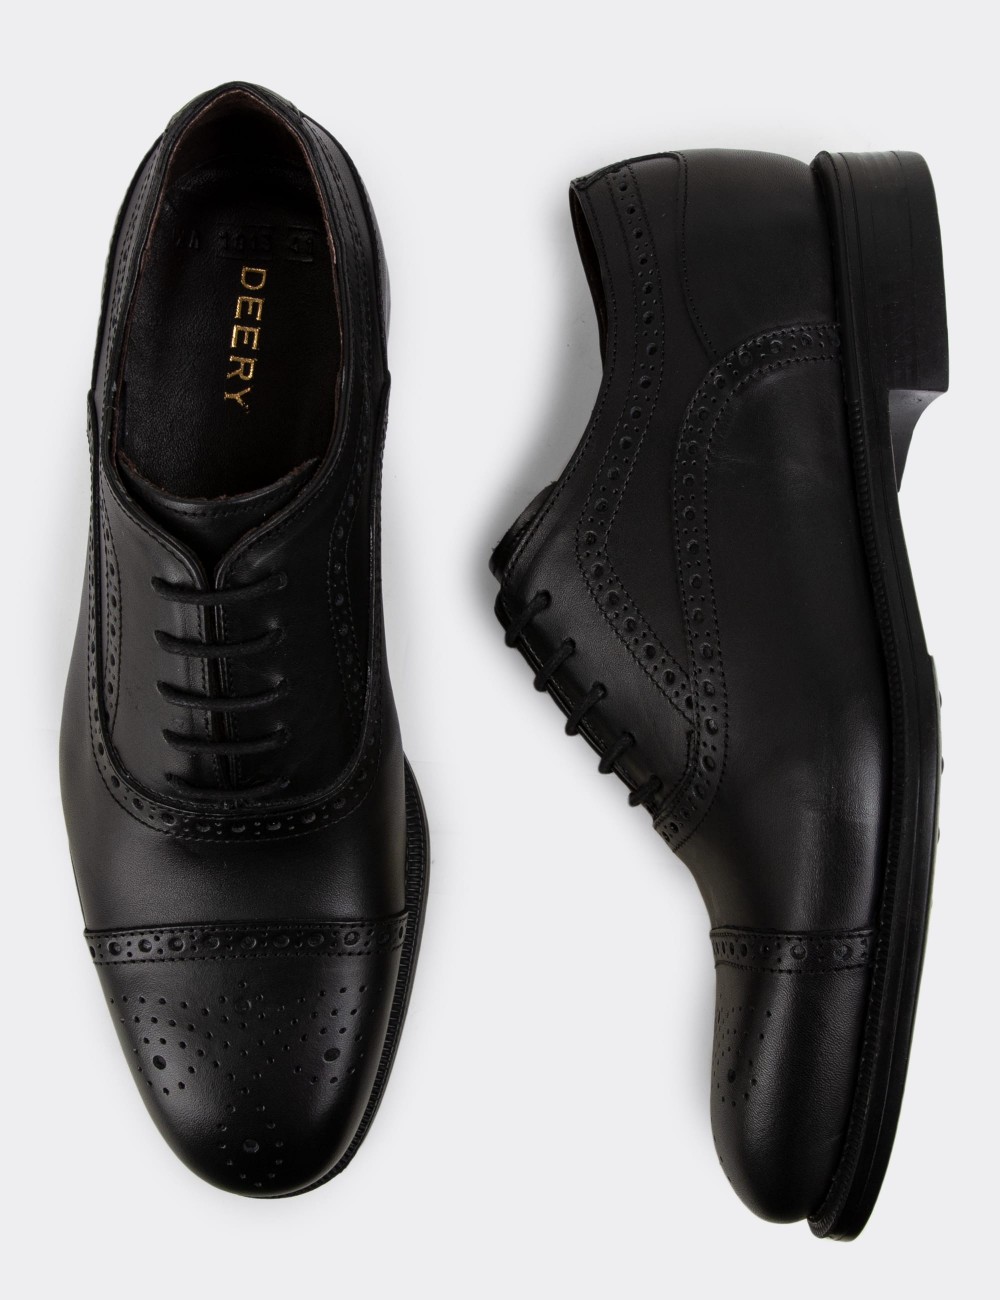 Black Leather Classic Shoes - 01813MSYHC03